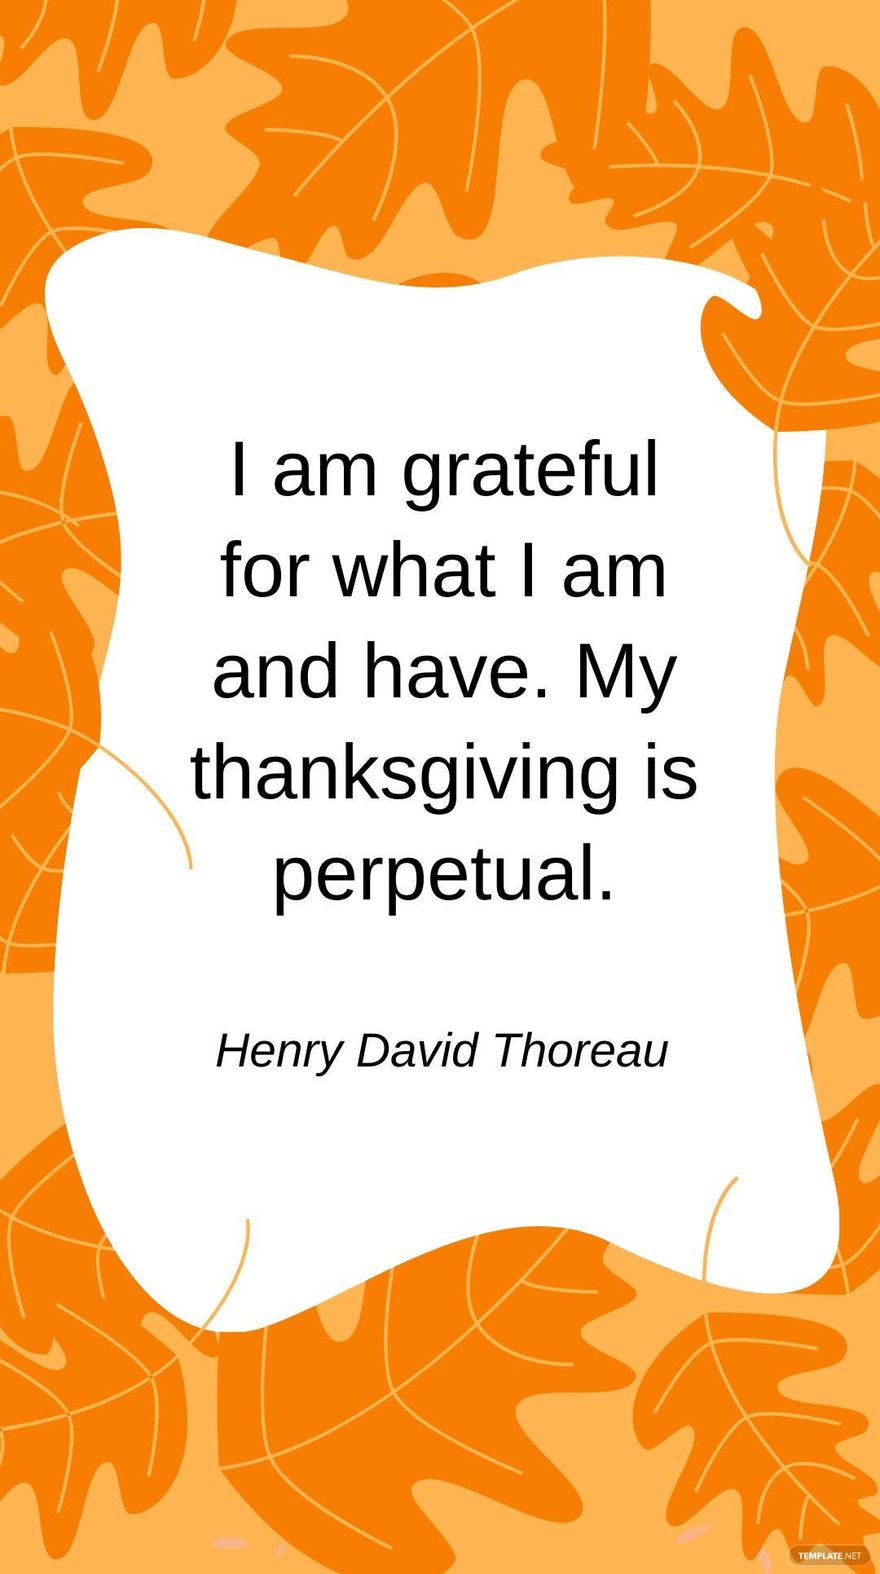 Henry David Thoreau - I am grateful for what I am and have. My thanksgiving is perpetual.